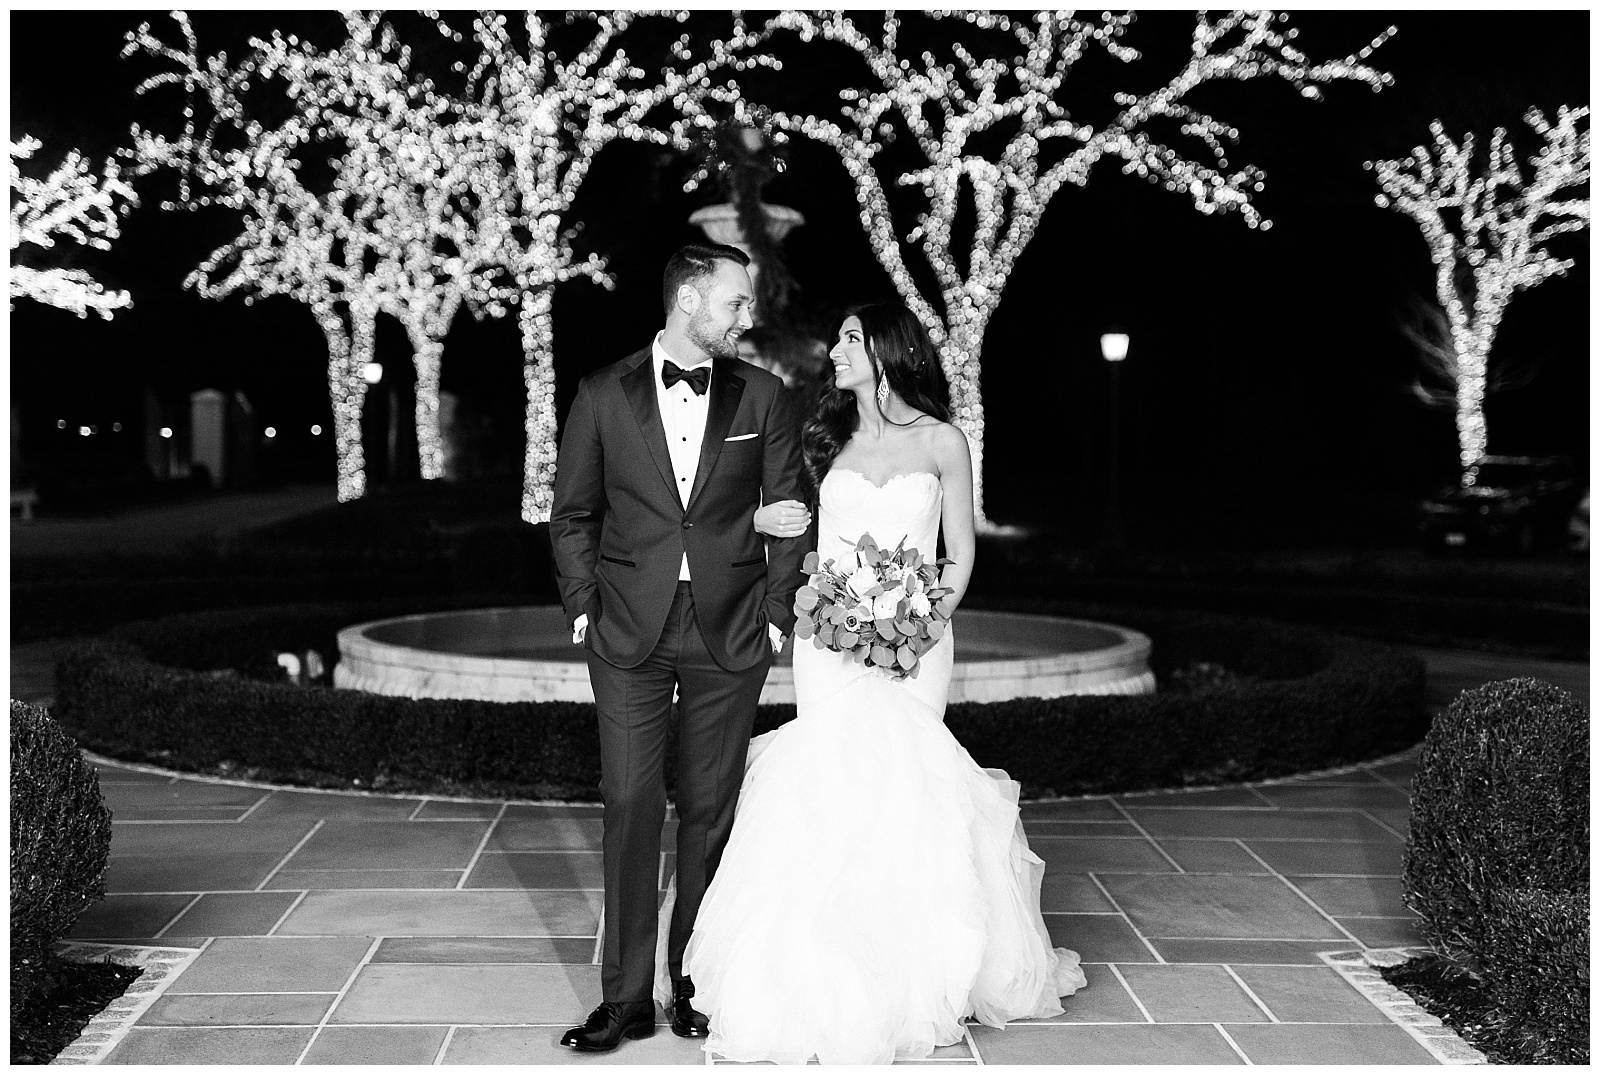 Park Chateau Wedding, Photographer, New Jersey, NJ, Winter, Bride and Groom Portraits, Nighttime, Outdoor, Bokeh, Lights, Festive, Black and white